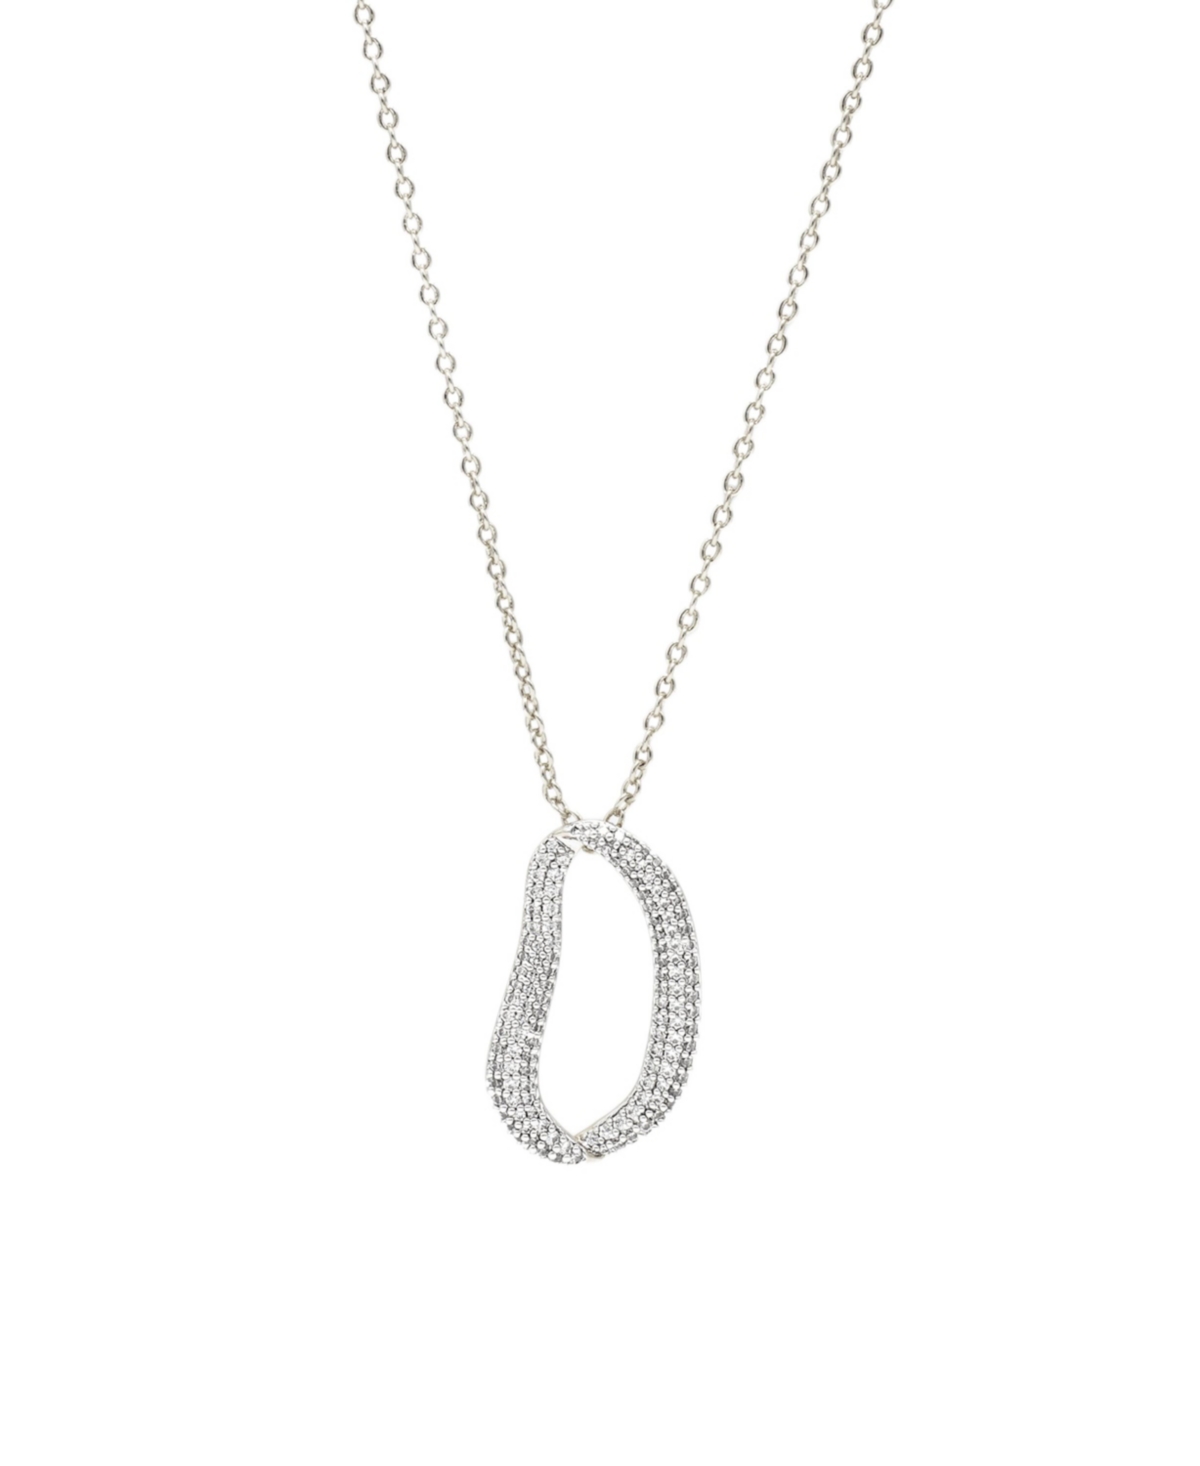 Infinity Pave Irregular Hoop Pendant Necklace - Silver